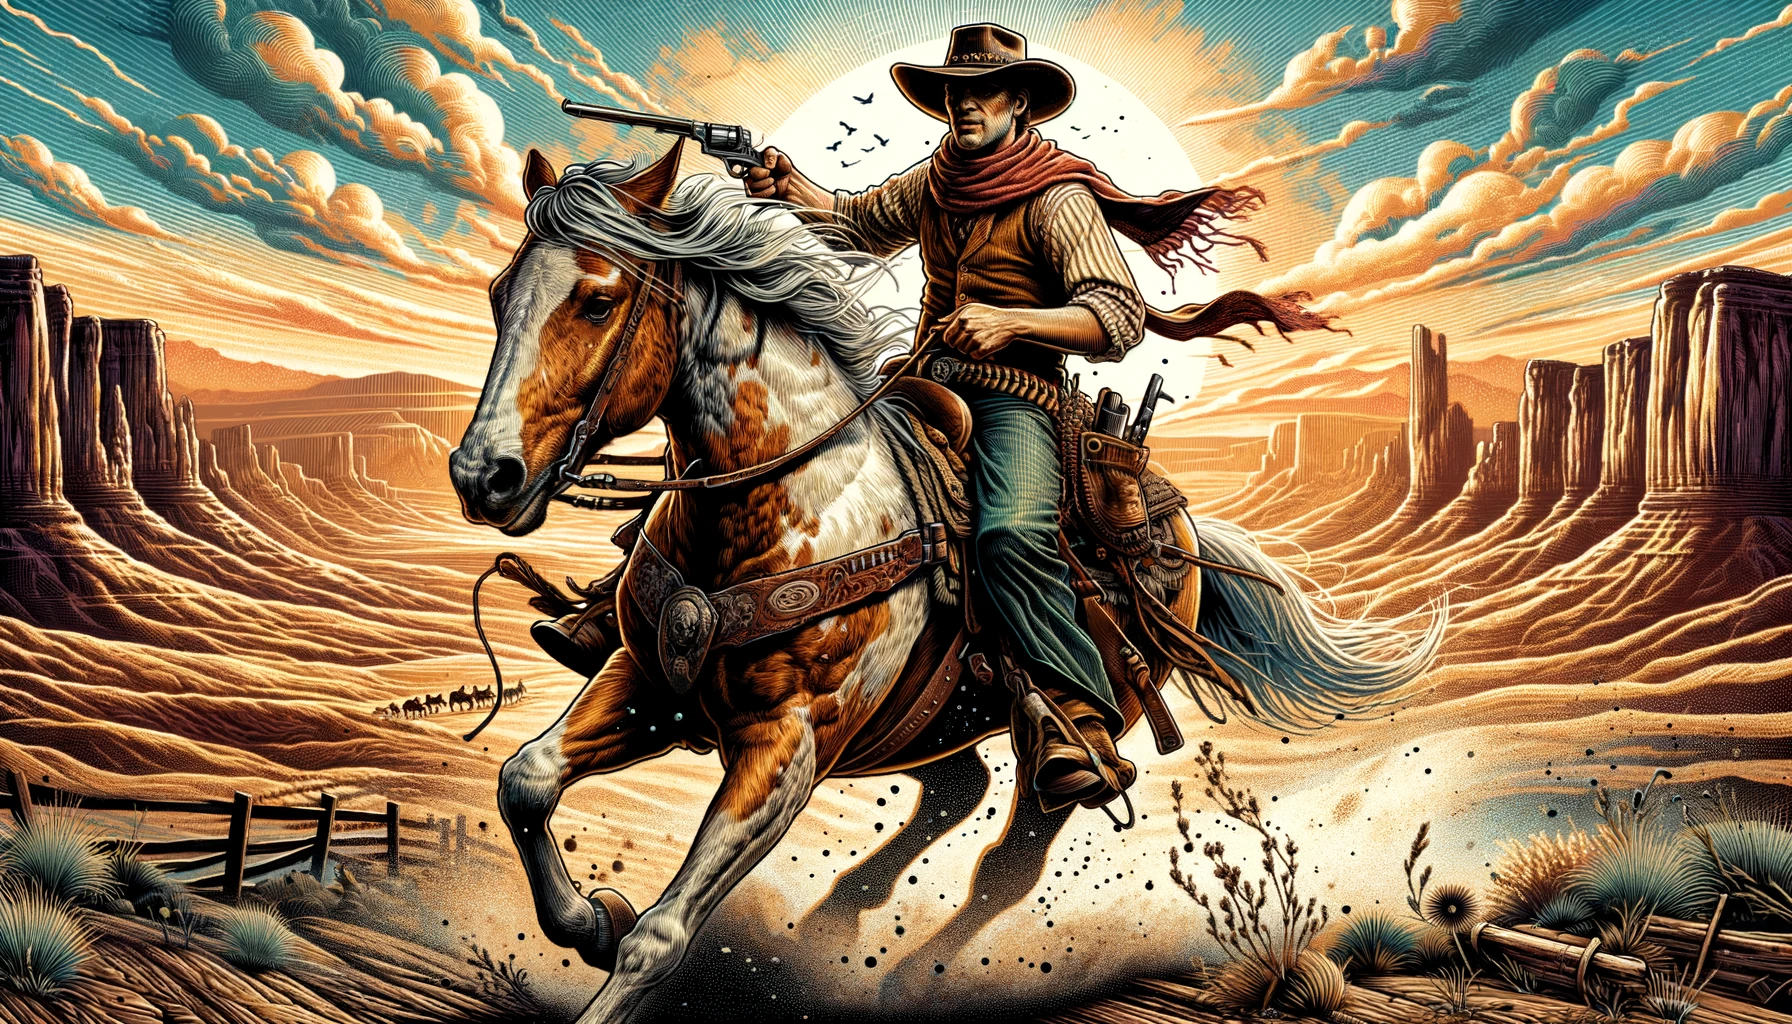 Joe Christmas' Ranch - A vivid and detailed wide illustration of Joe Christmas, depicted as a cowboy in a dynamic western setting. Joe is shown riding a spirited horse acros (2)